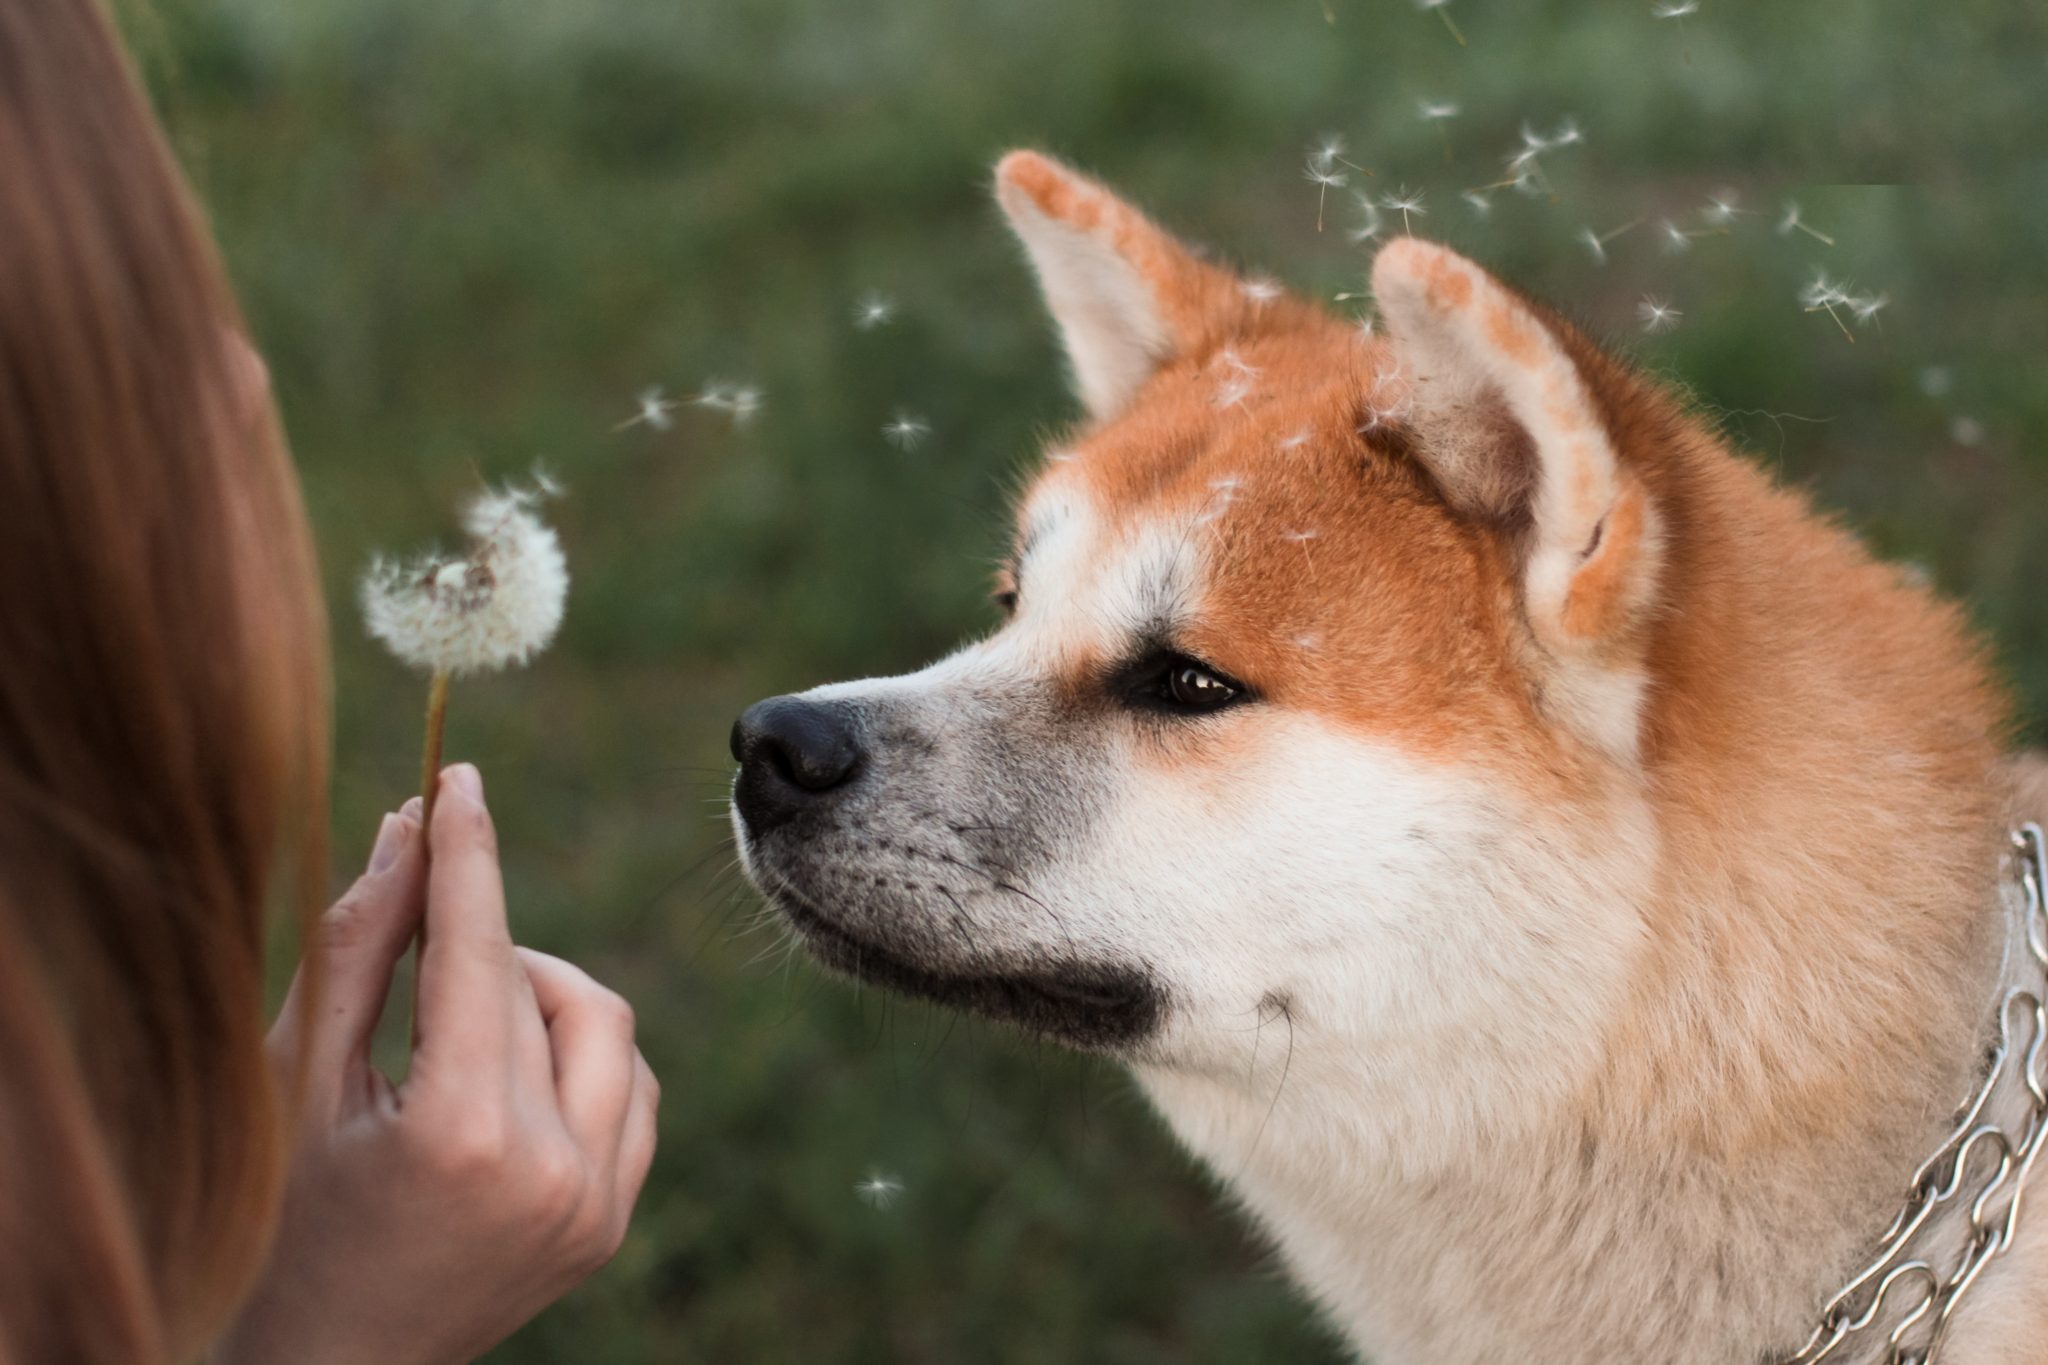 woman blowing dandelion with dog looking on